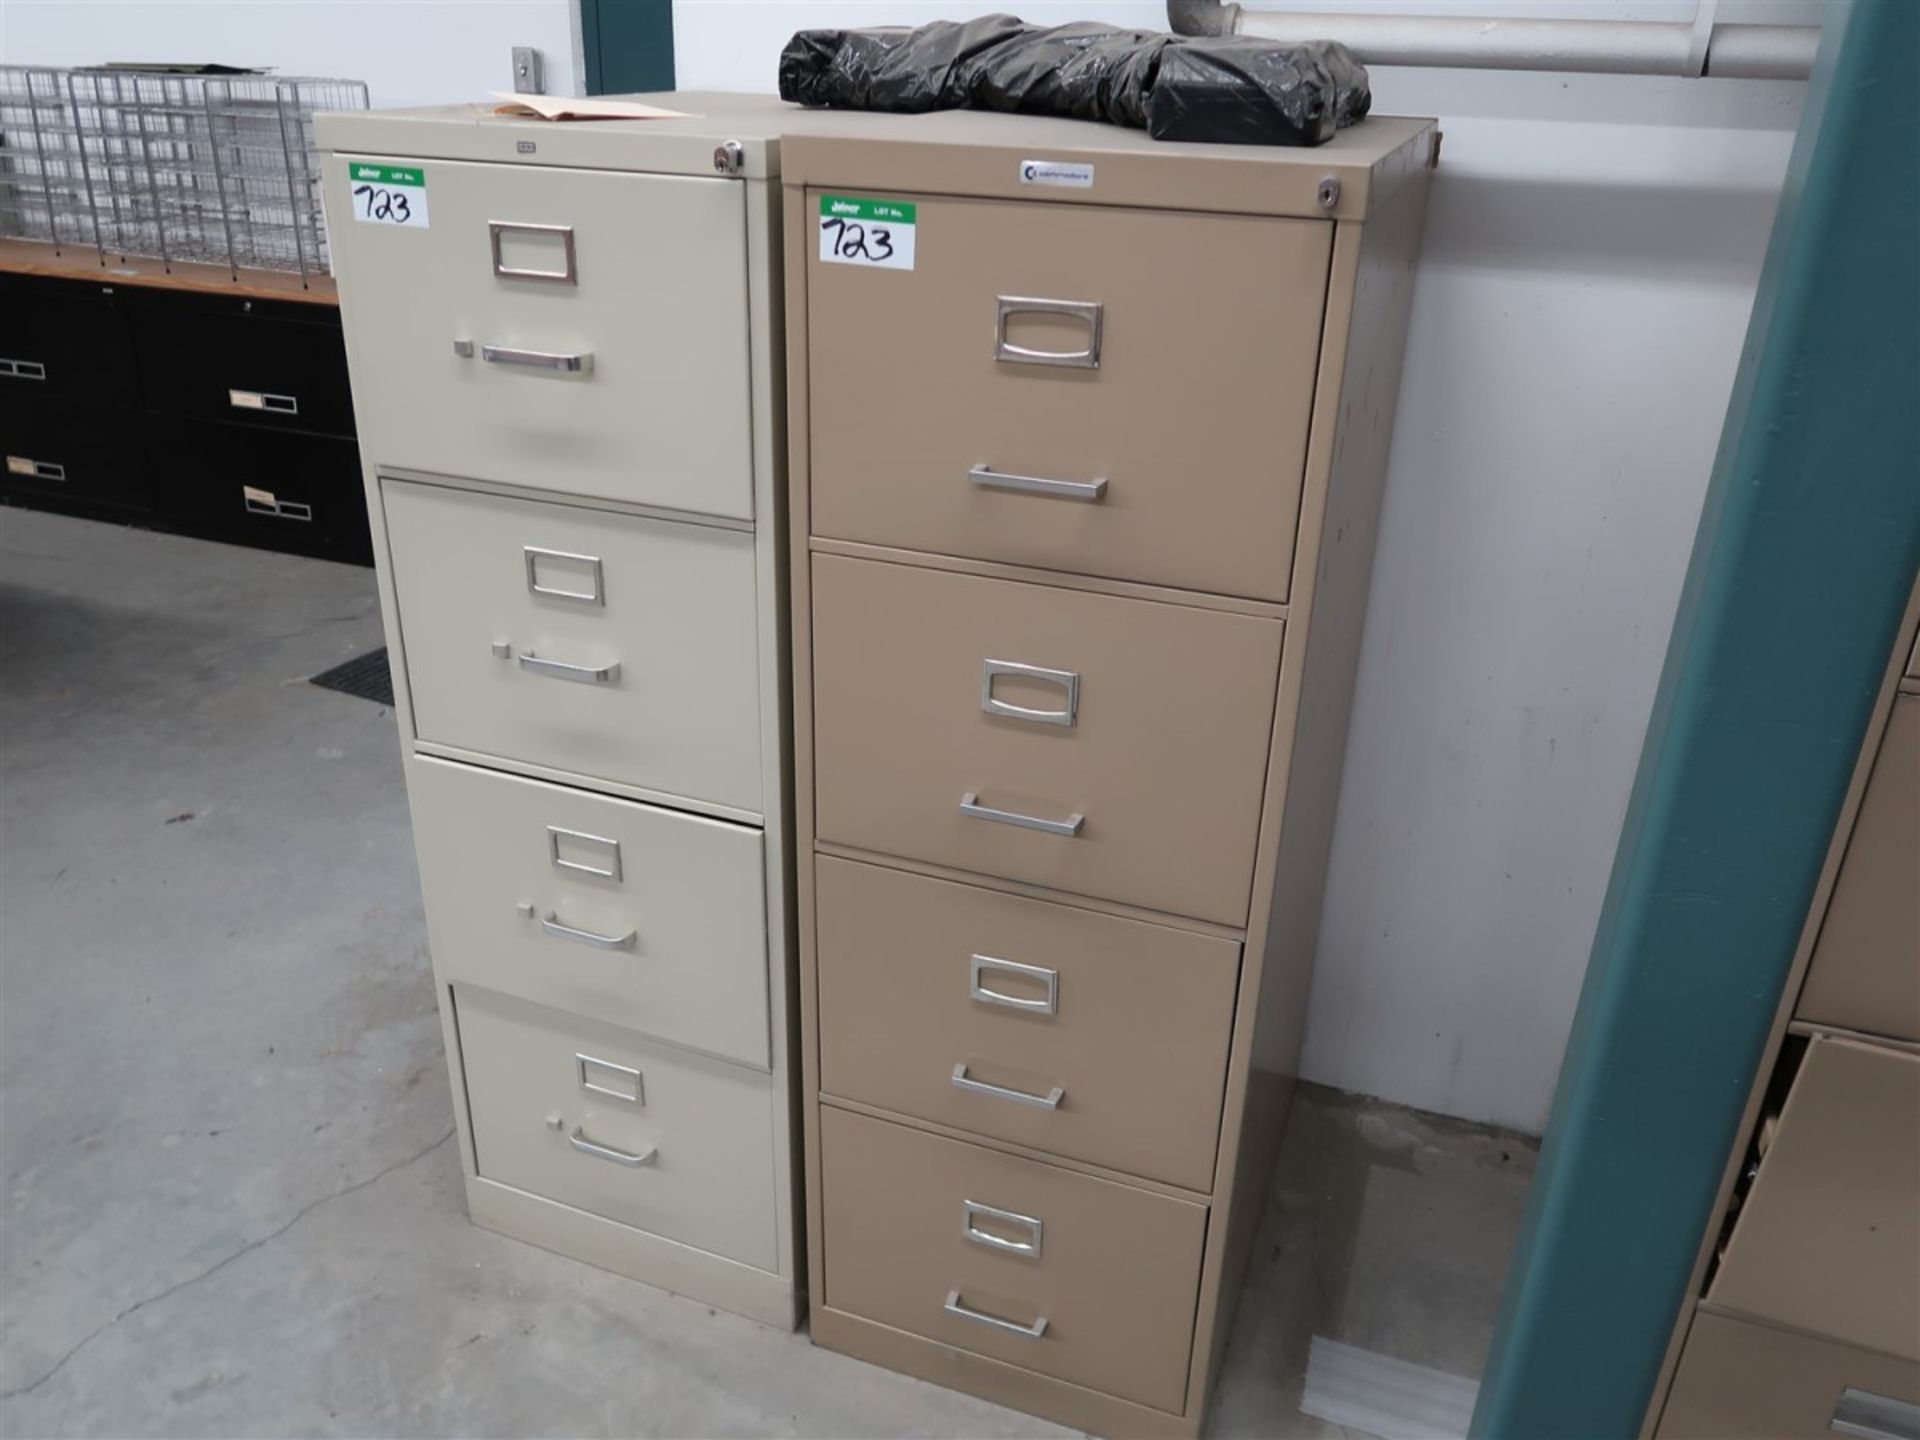 2 LEGAL 4 DR. UPRIGHT FILE CABINETS